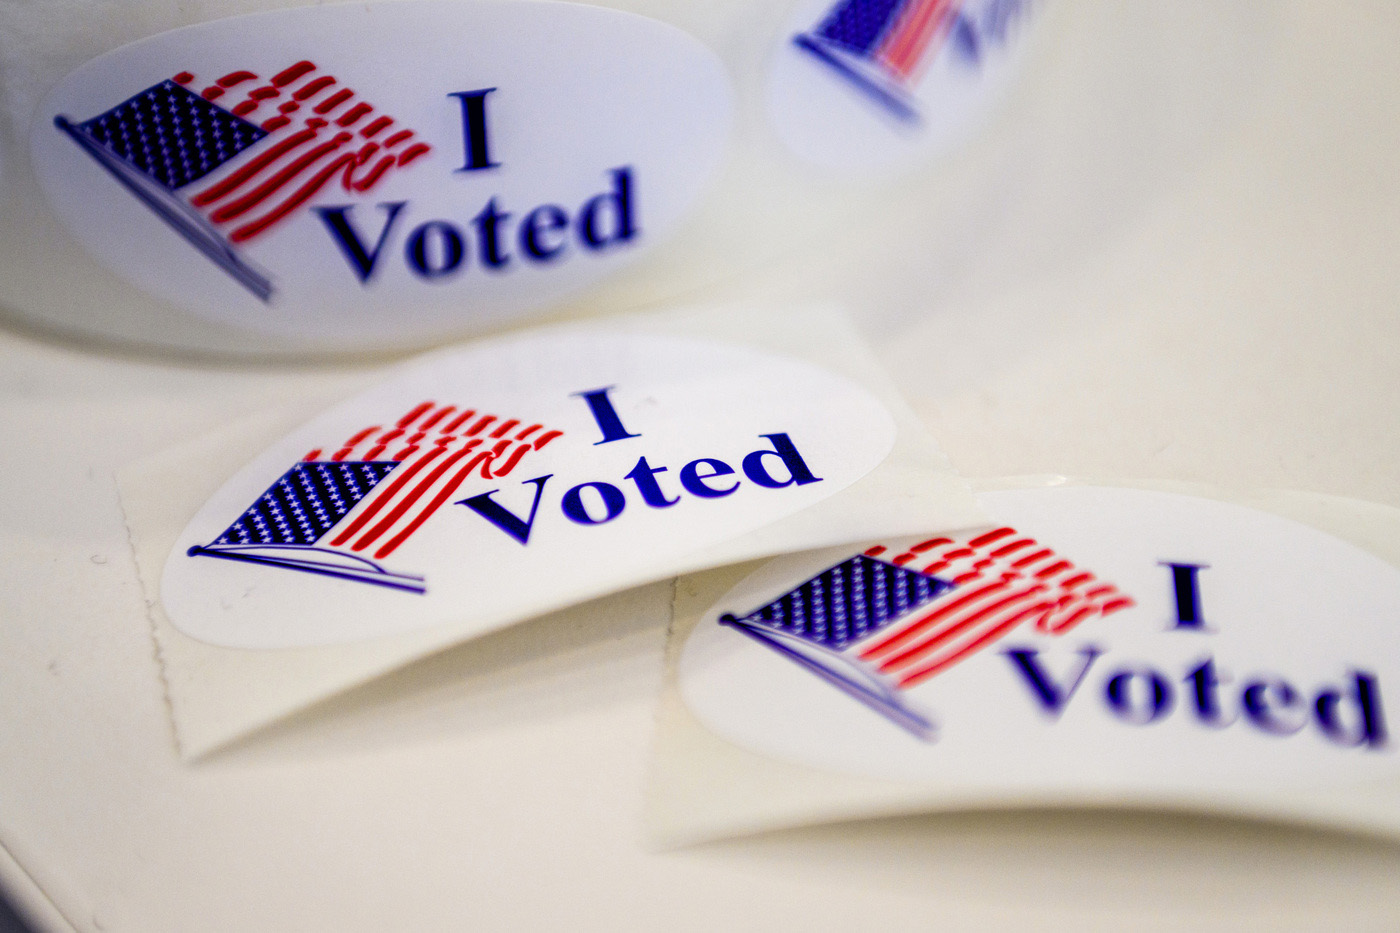 'i voted' stickers on a white table